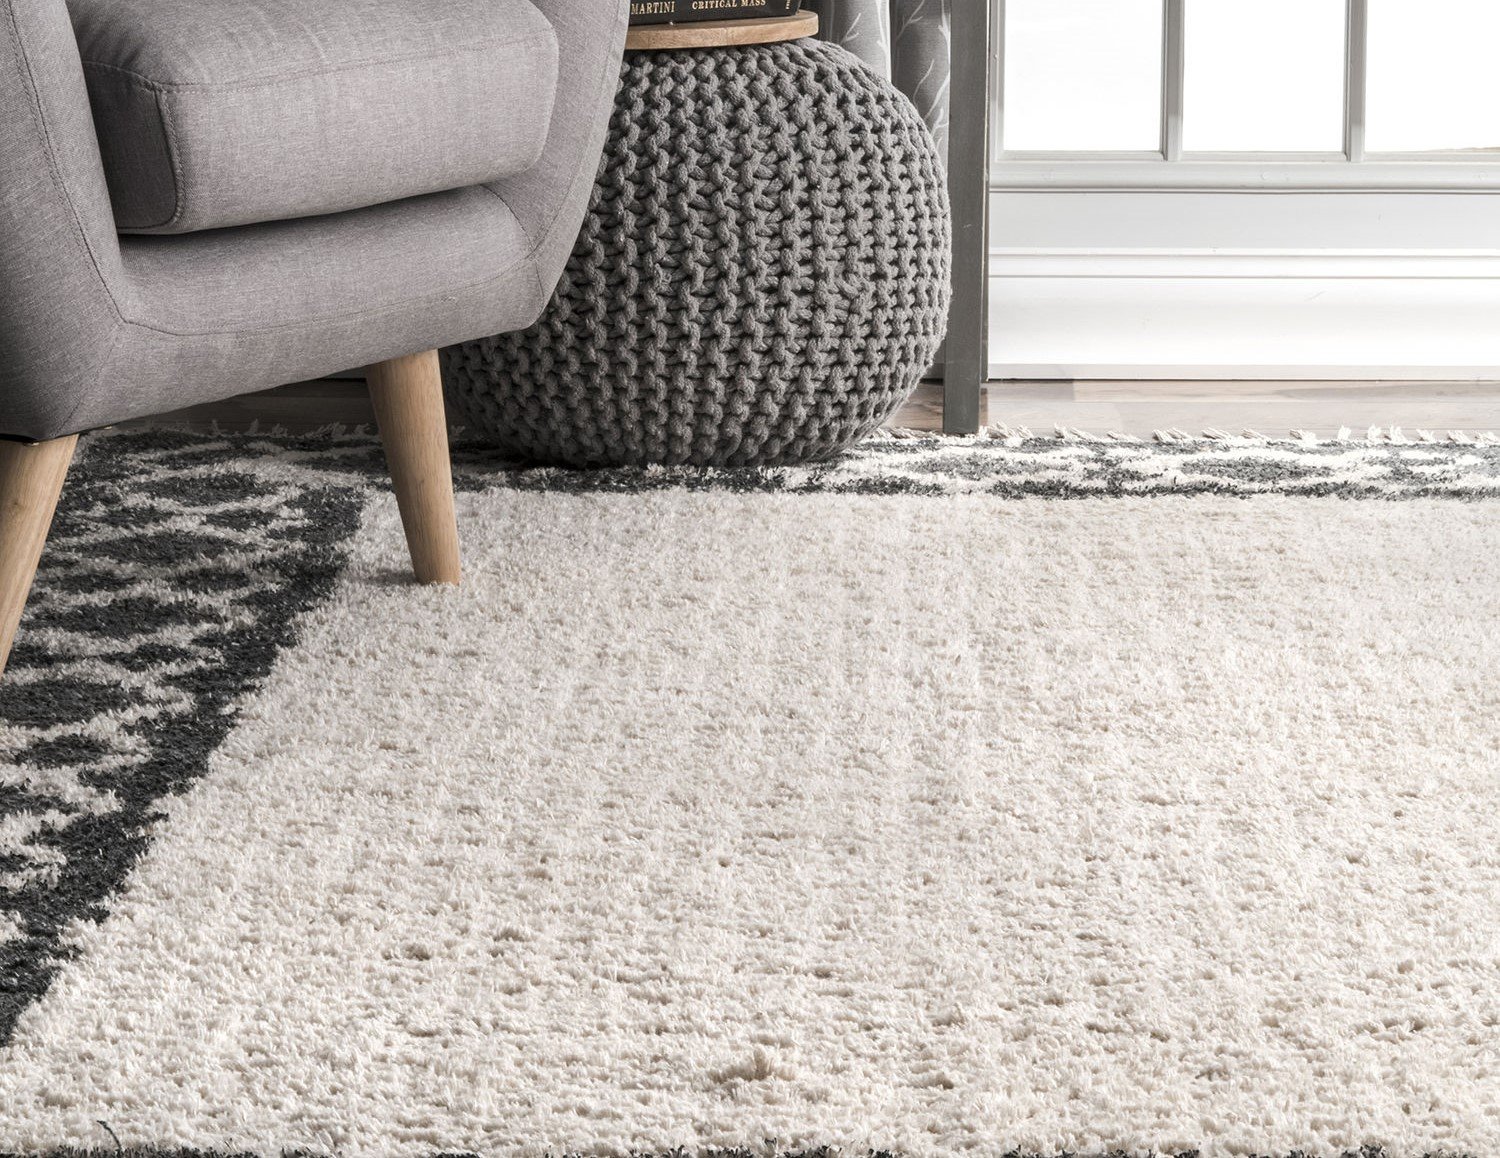 How to Choose an Area Rug: Materials, Sizes, Styles & More